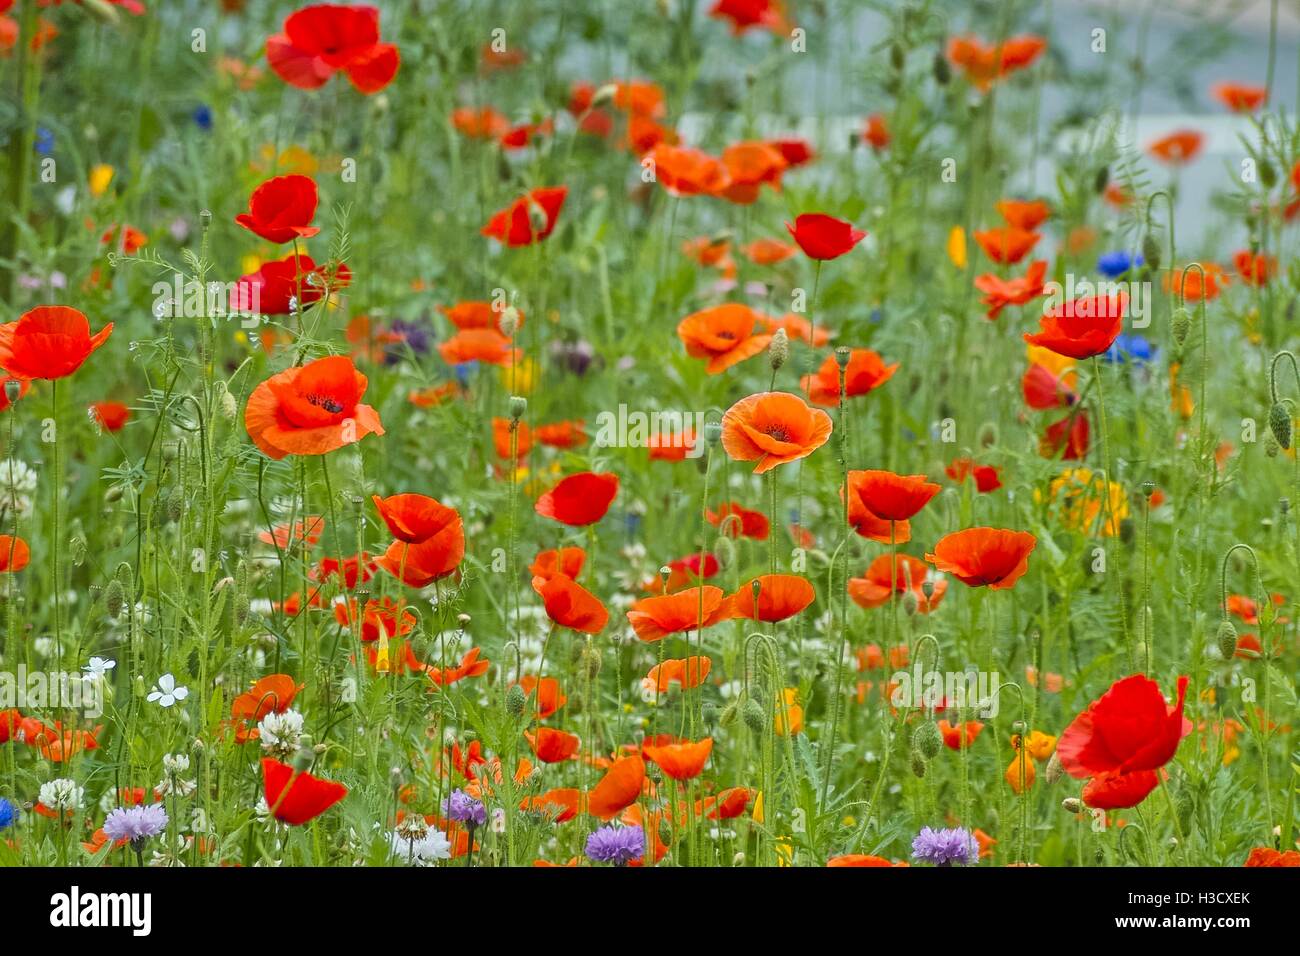 Beautiful wildflowers in red, orange yellow and blue. Different kinds of Poppy flowers like the Field Poppy, Californian Poppy in a blooming border Stock Photo